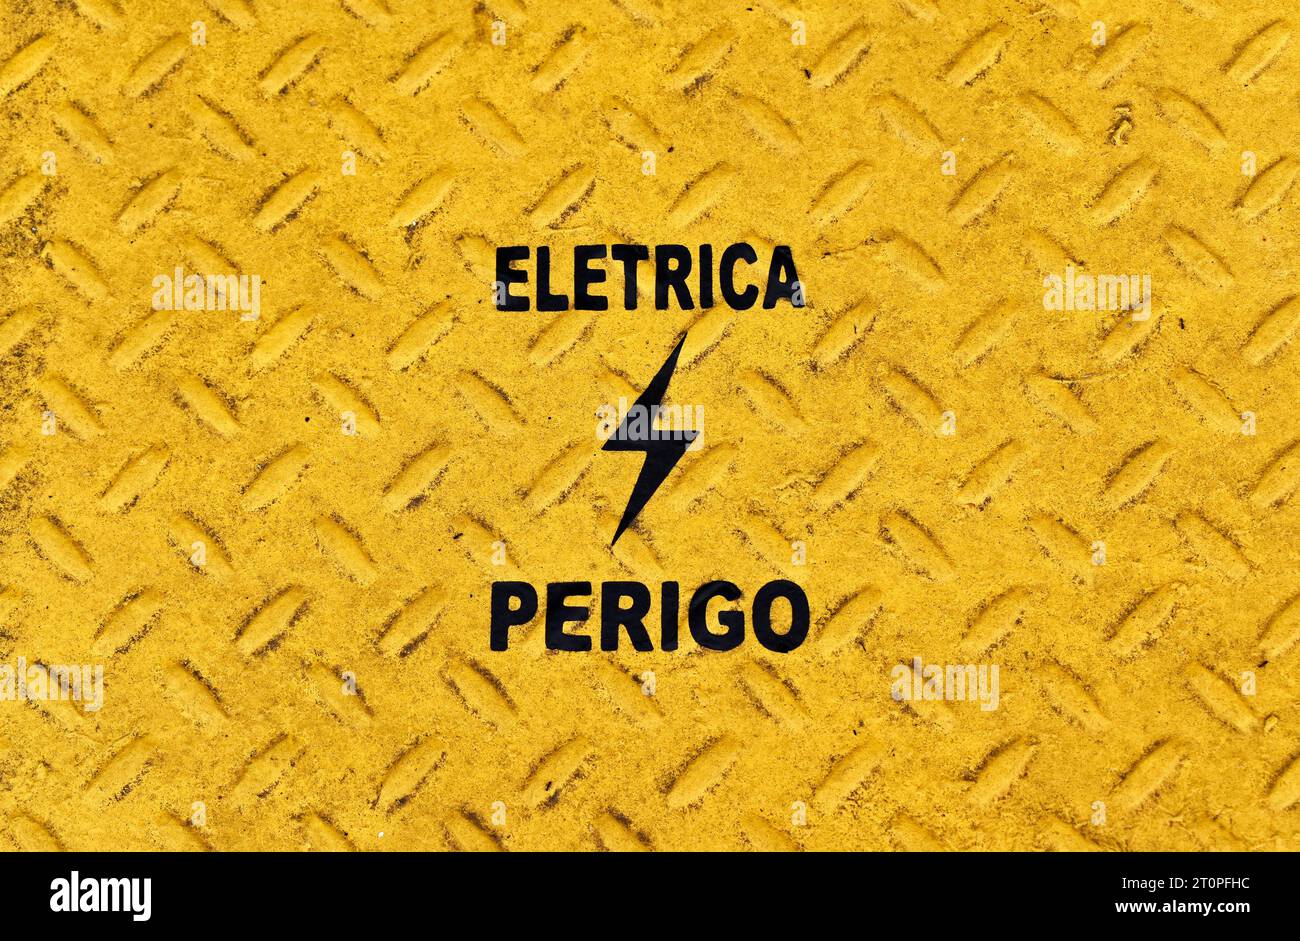 Yellow metallic surface with portuguese words that mean ELETRICITY and DANGER (Eletrica Perigo) Stock Photo